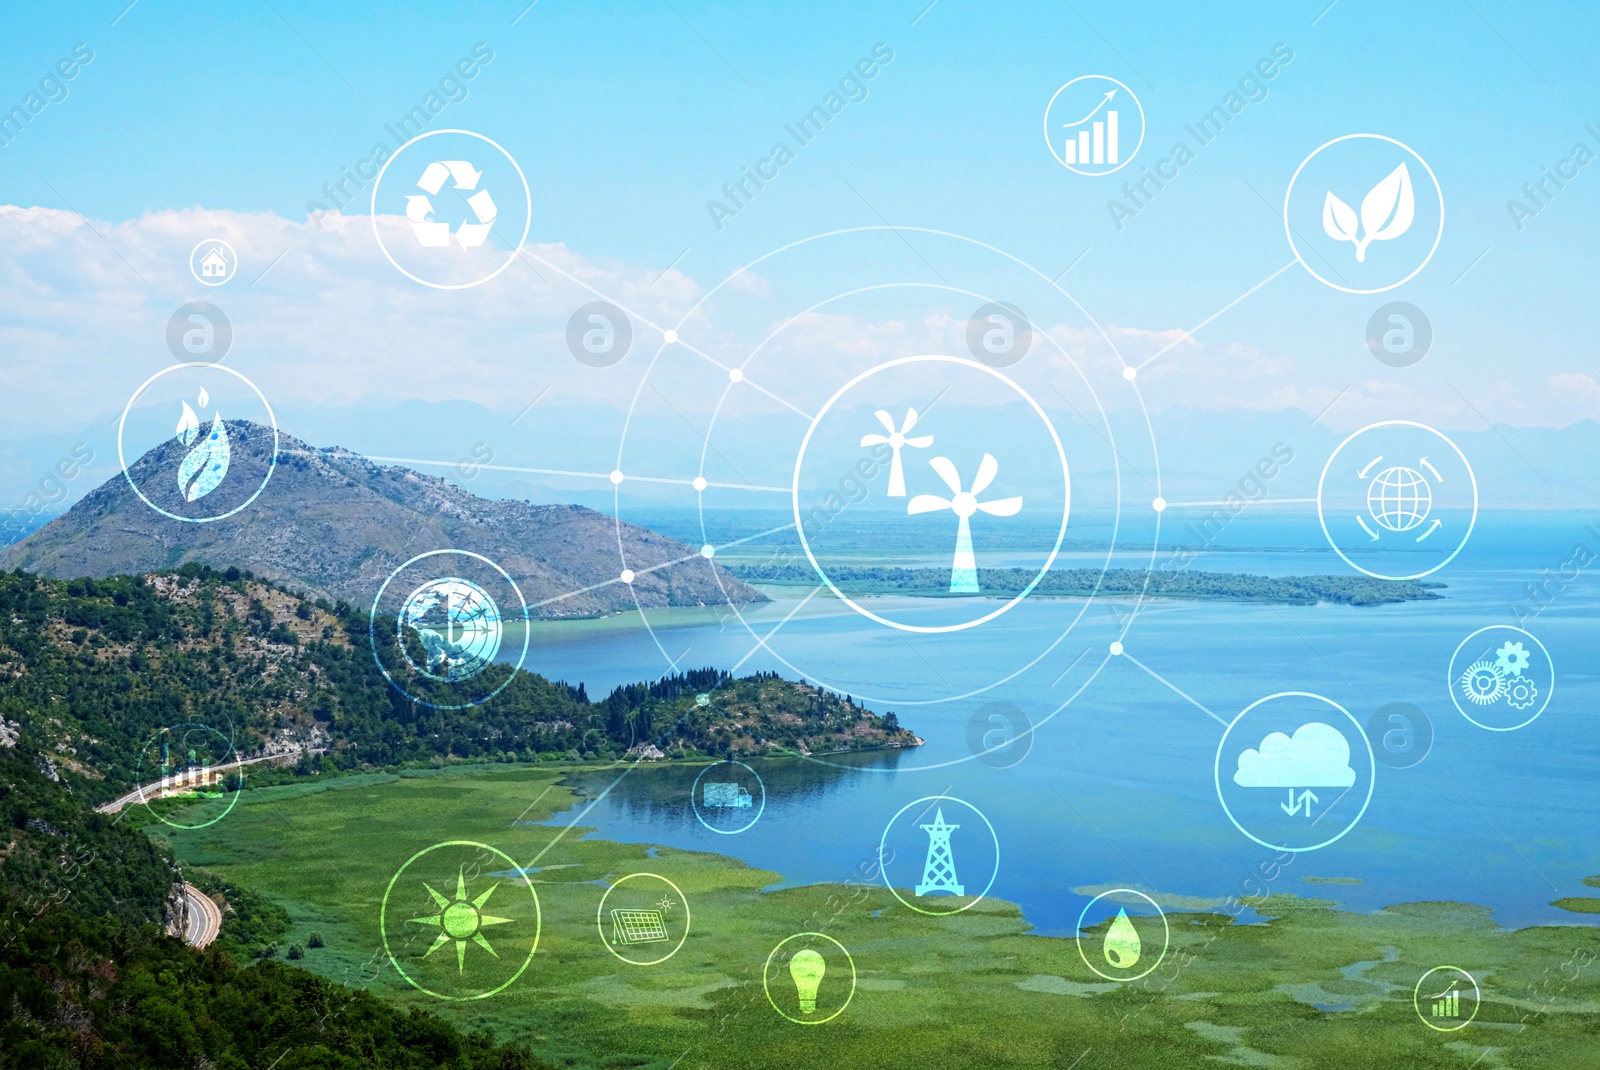 Image of Digital eco icons and beautiful cove on sunny day